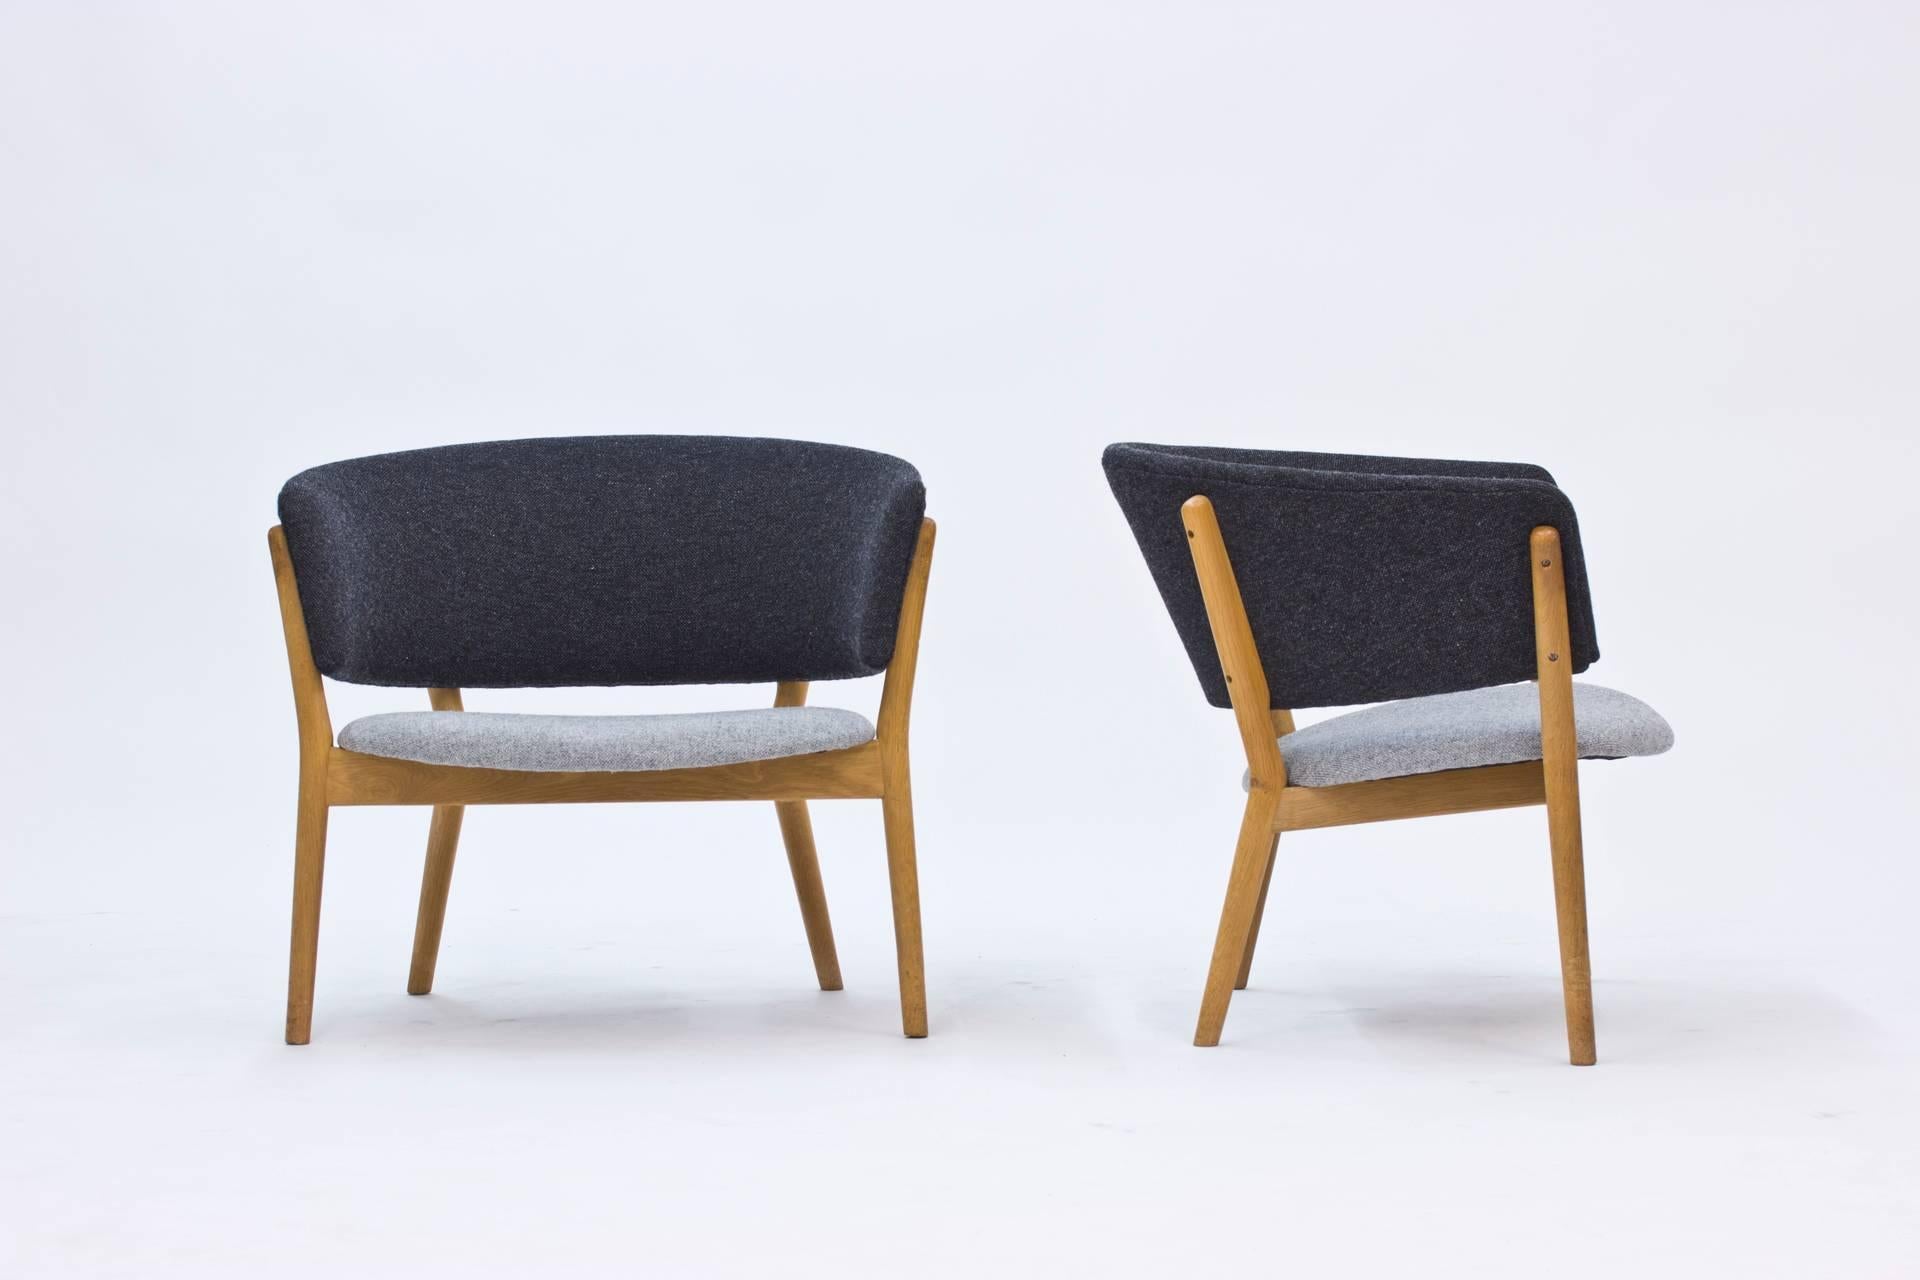 Pair of lounge chairs by Denmark's First Lady of Design, Nanna Ditzel. Made of oak and re-upholstered with Kvadrat wool fabric. Very stable and in excellent condition.